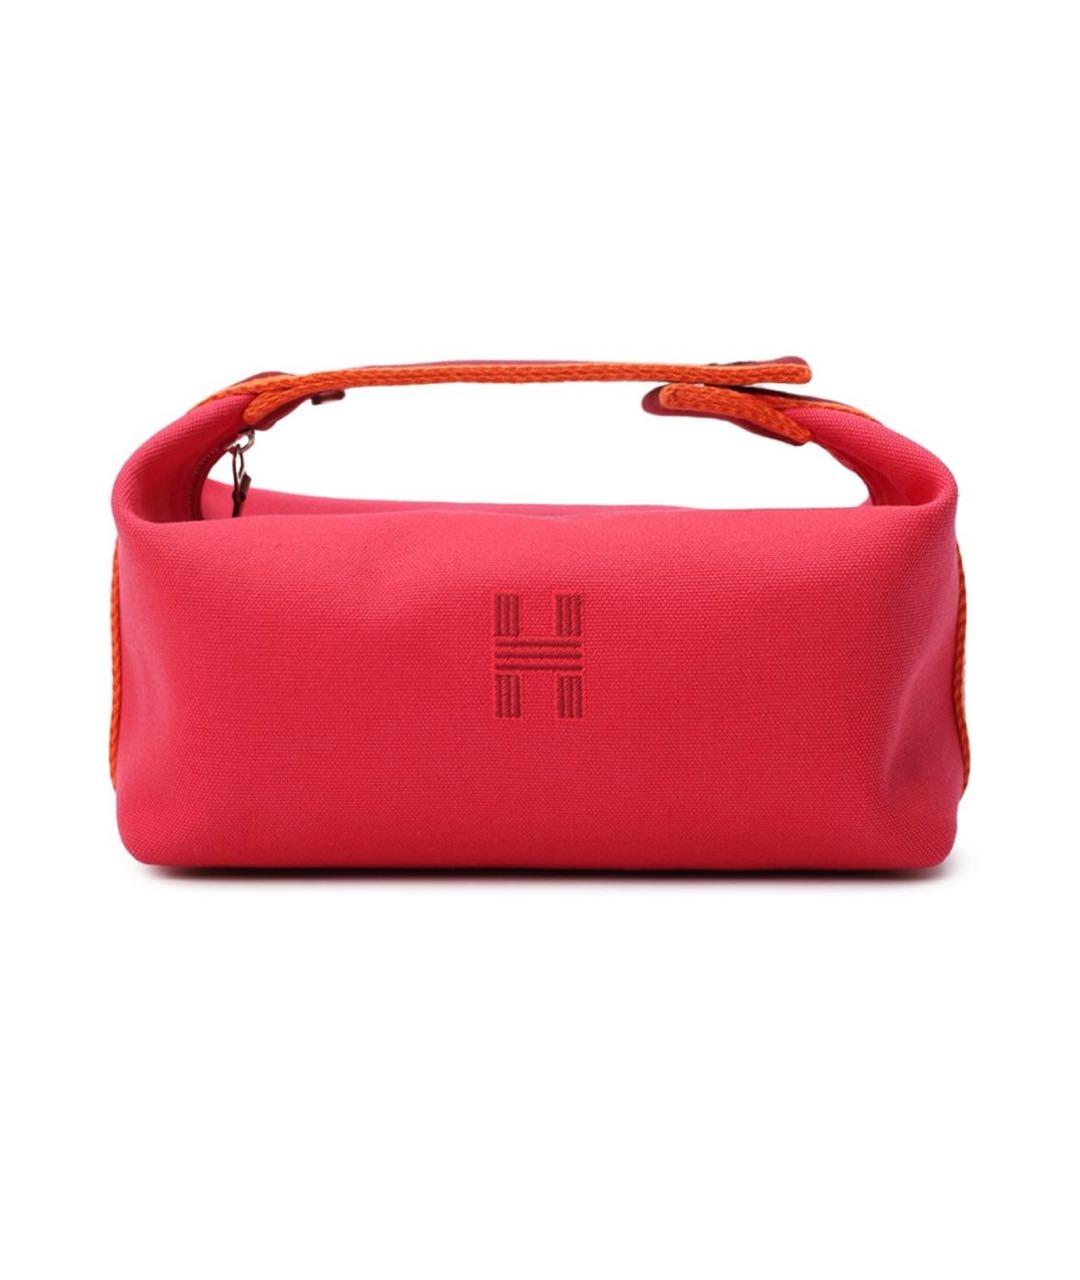 HERMES PRE-OWNED Фуксия косметичка, фото 1